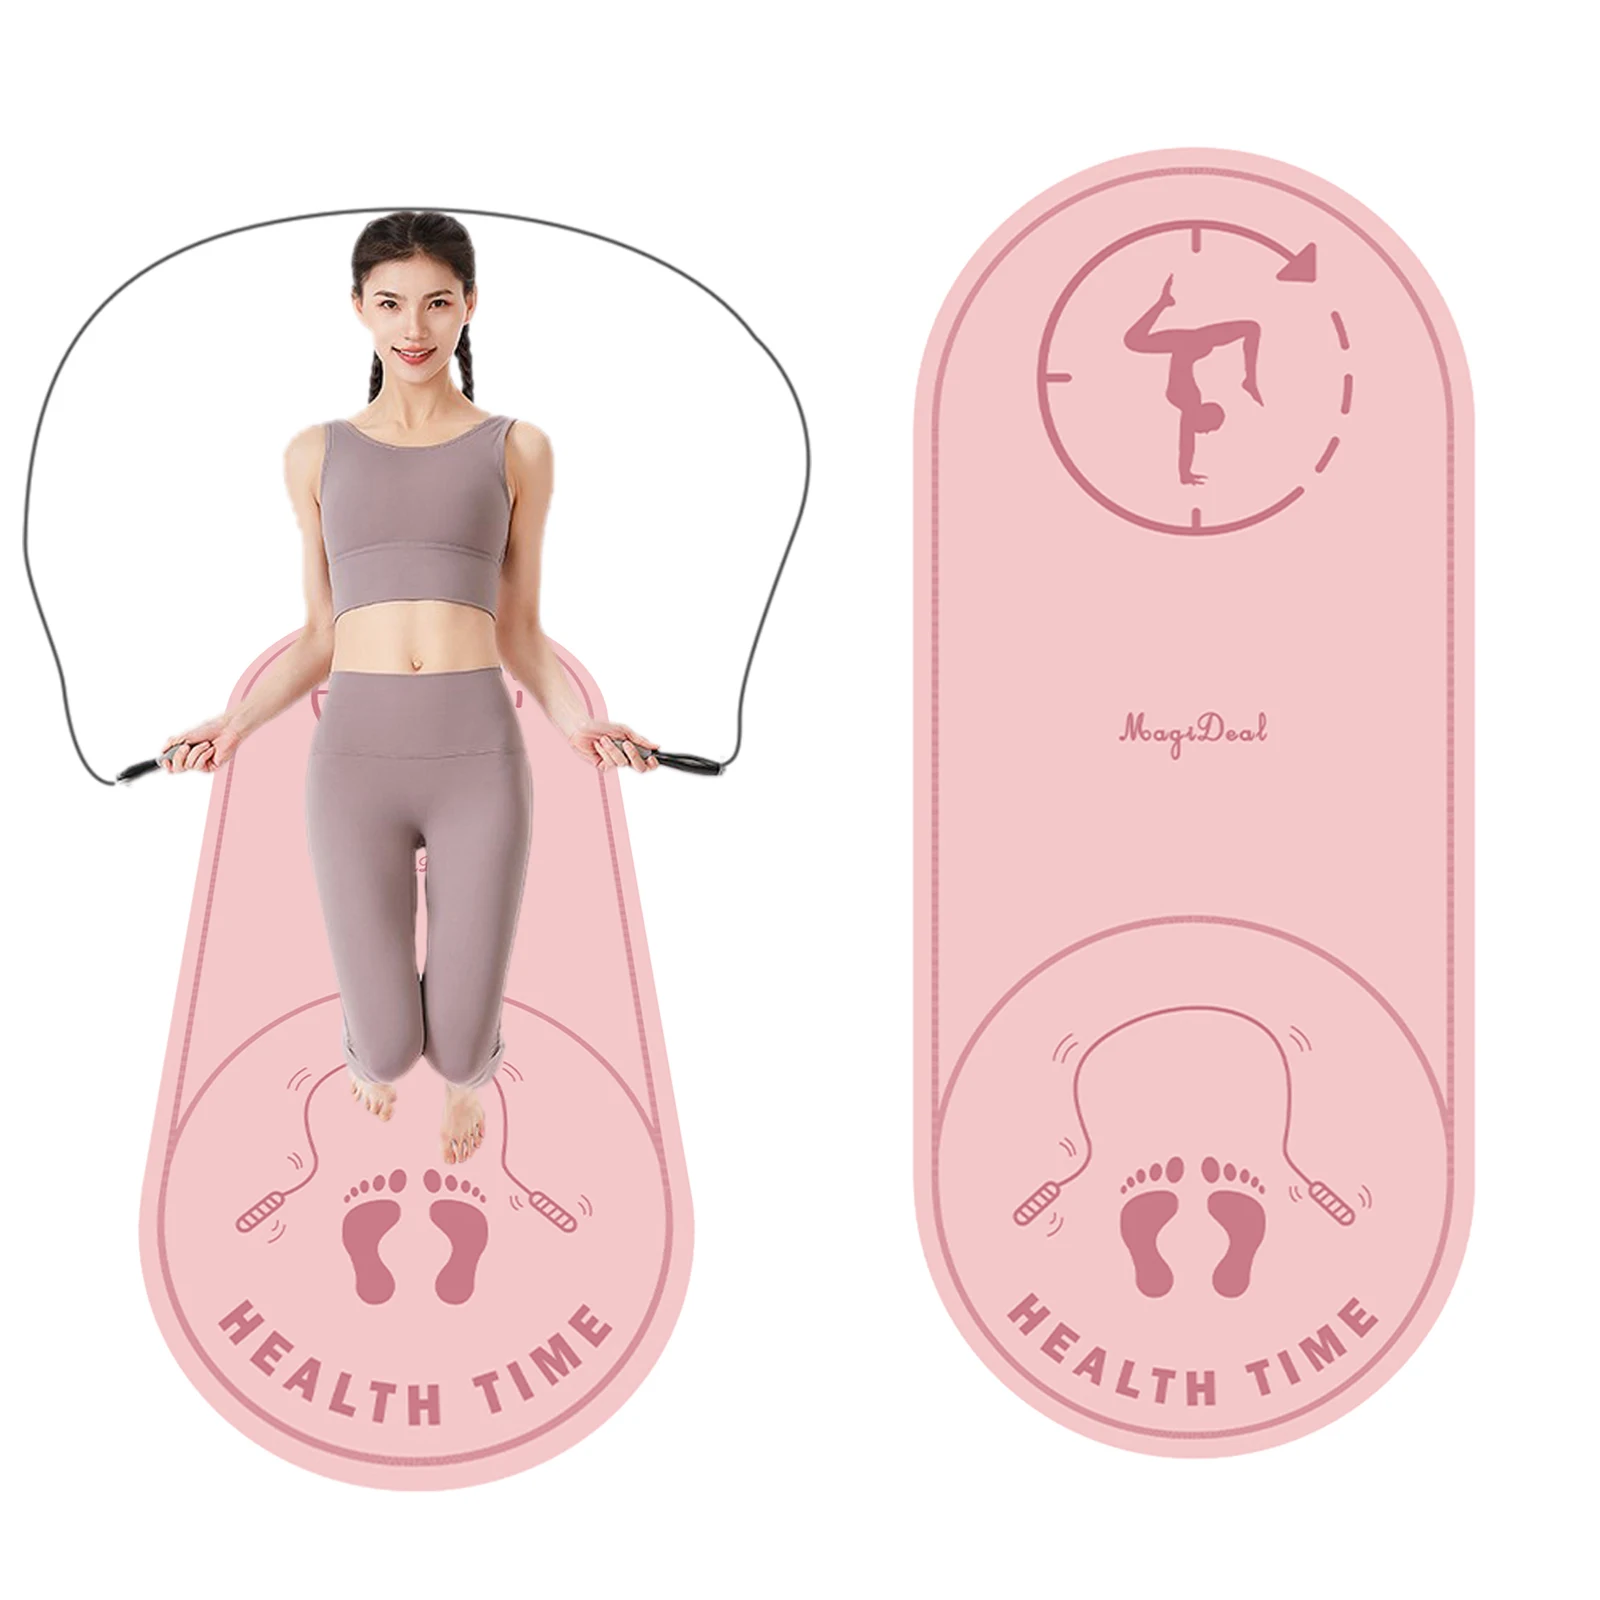 Indoor Non-slip Yoga Mat, Skipping Rope Jumping Rope Knee Protect Mat, Sound Insulation Shock Absorption Pad for Cardio Sport